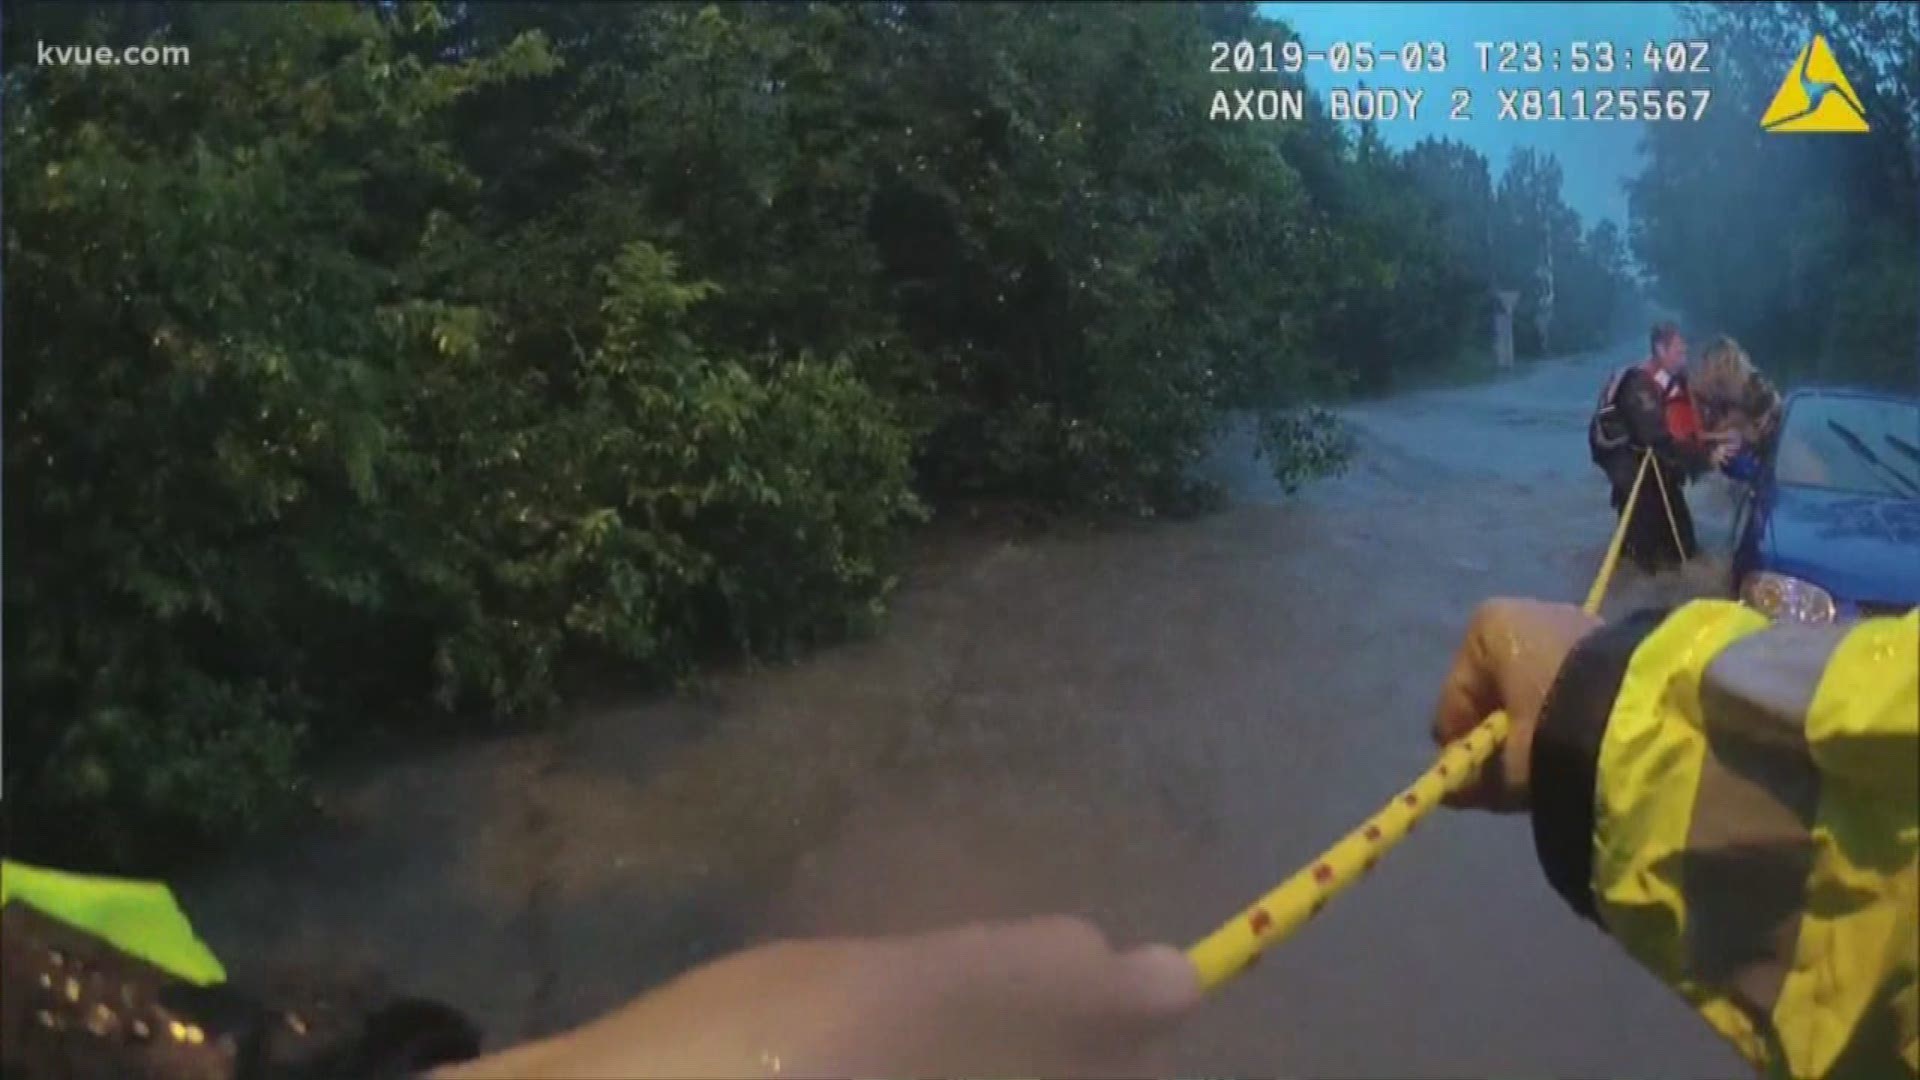 Video from the body cameras of a group of Austin police officers shows them fighting the rushing water to pull 3 people and a dog to safety.